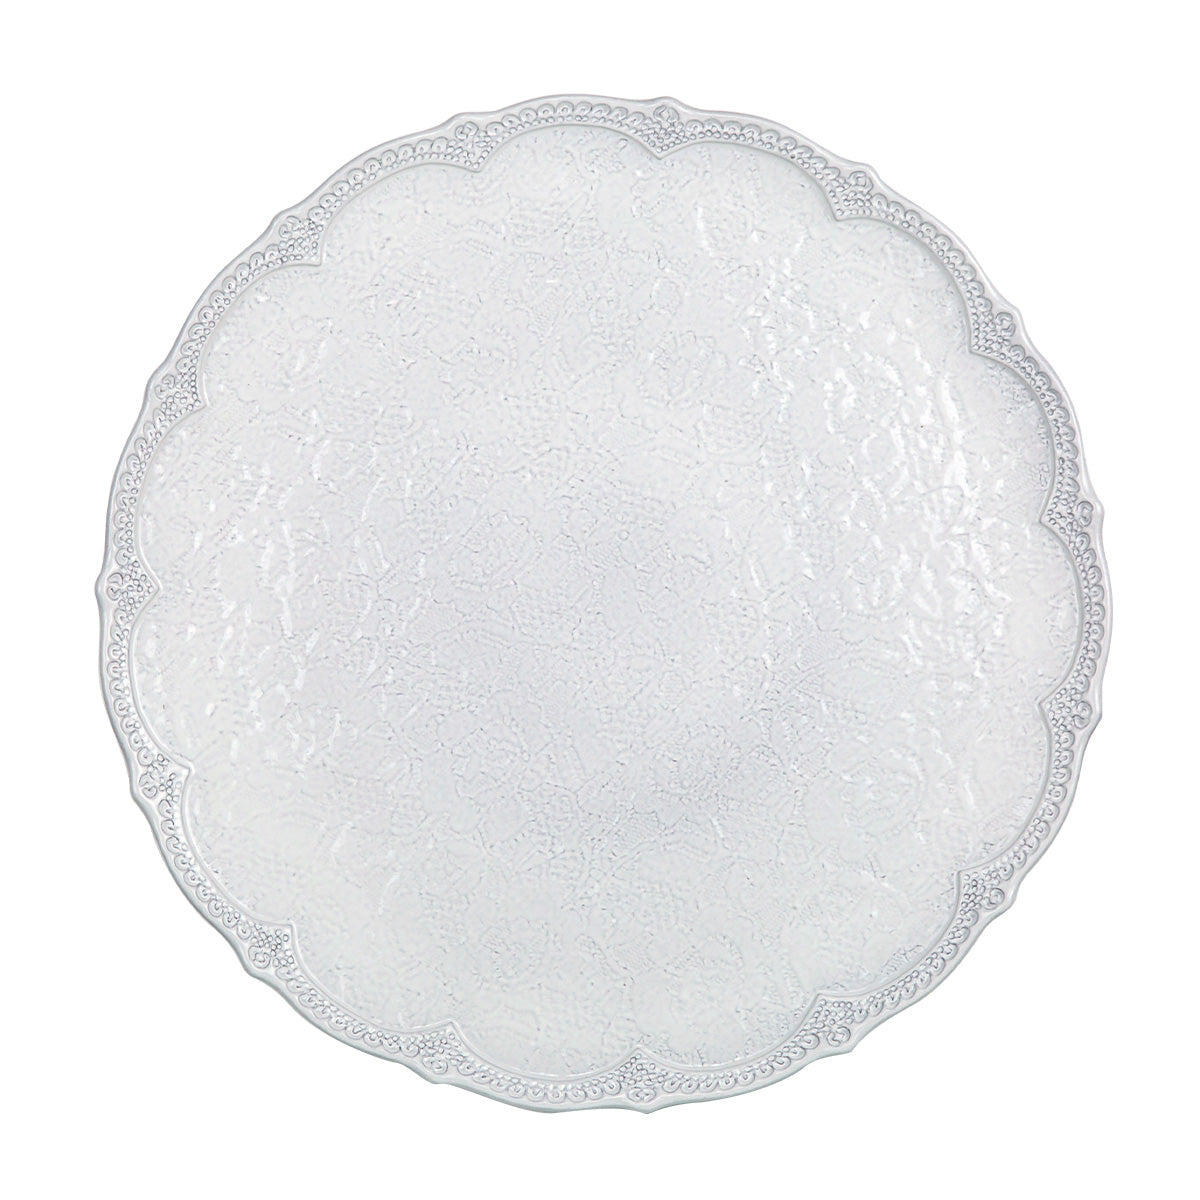 Merletto White Lace Scalloped Charger